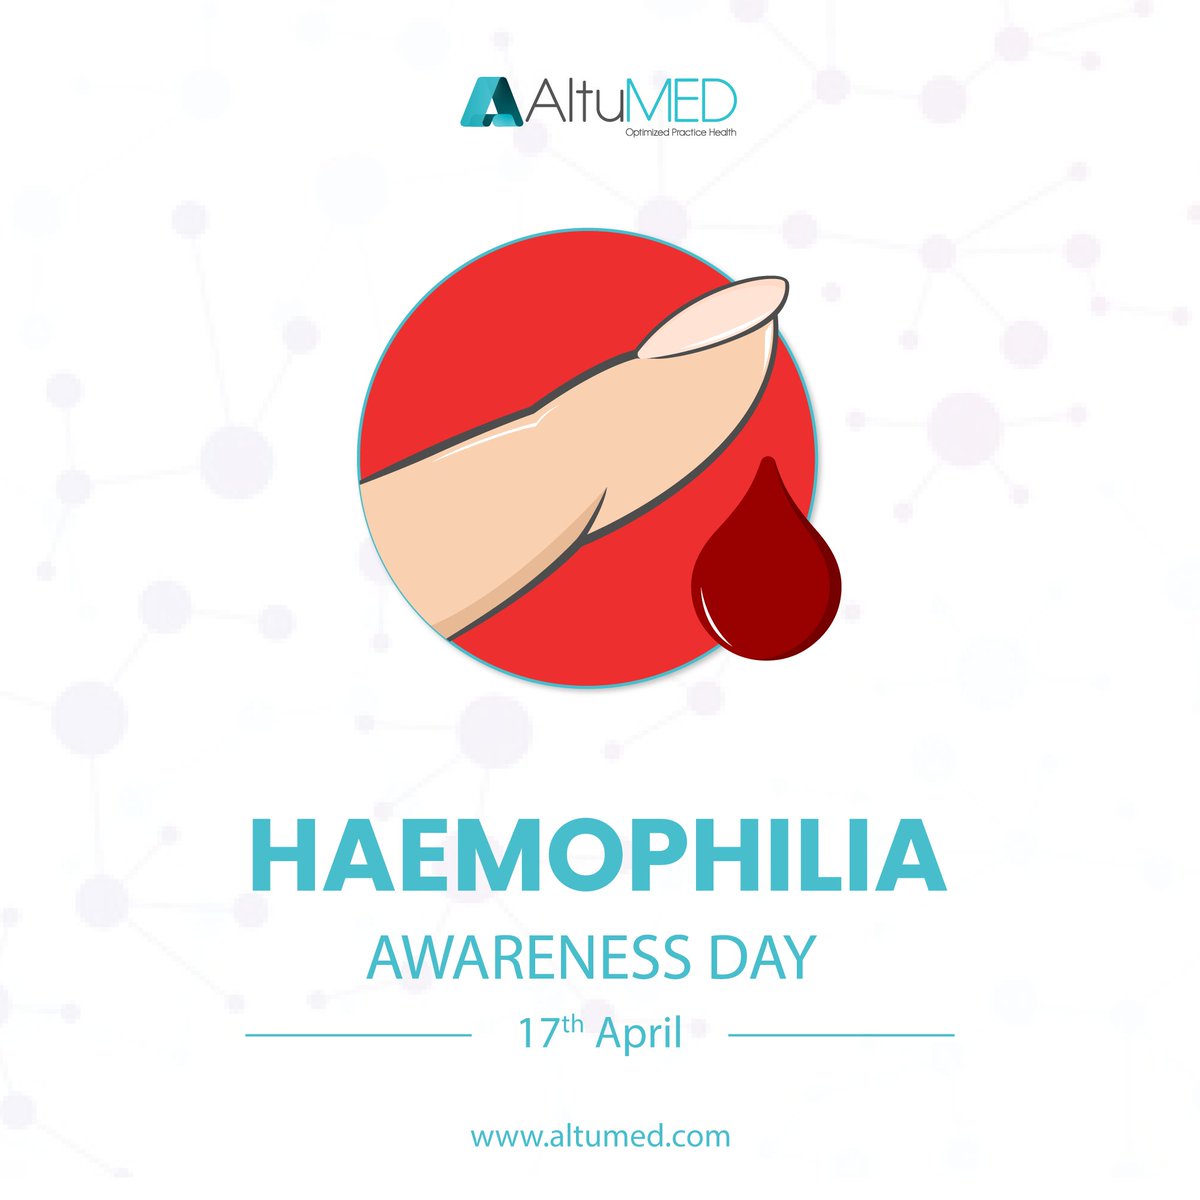 Join us in raising awareness for Haemophilia this World Haemophilia Day! 

Let's work towards better access to treatments and care, supporting those with bleeding disorders to effectively manage their condition. 

Together, we can make a difference. #AltuMED #HaemophiliaAwareness